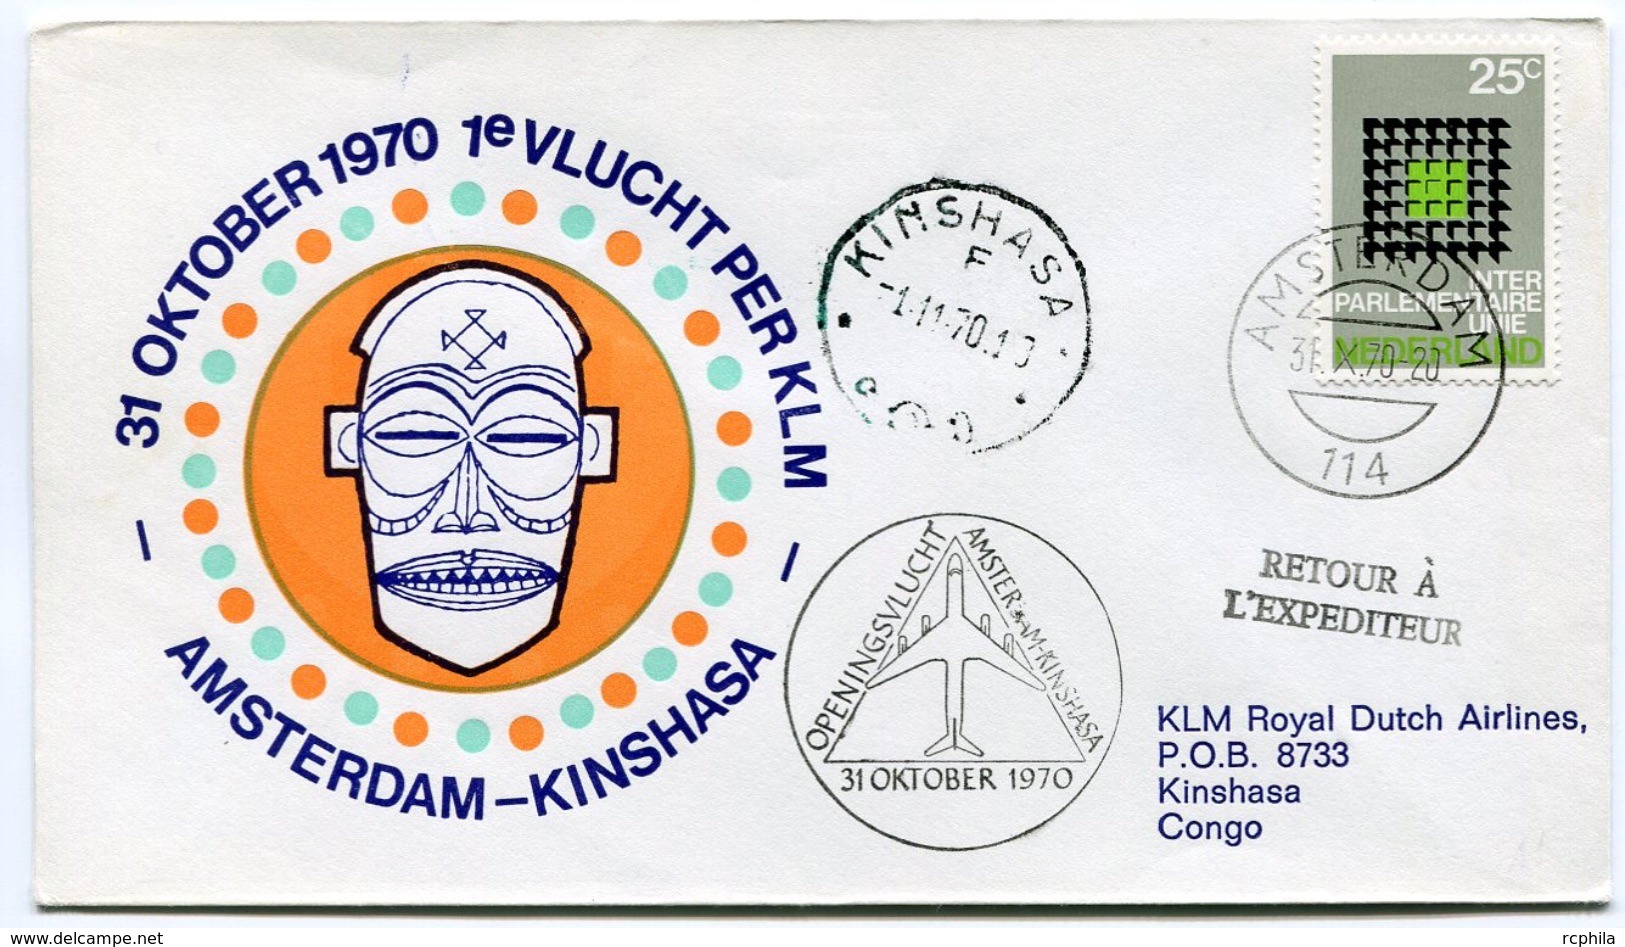 RC 6707 PAYS-BAS KLM 1970 1er VOL AMSTERDAM - KINSHASA CONGO FFC NETHERLANDS LETTRE COVER - Luchtpost